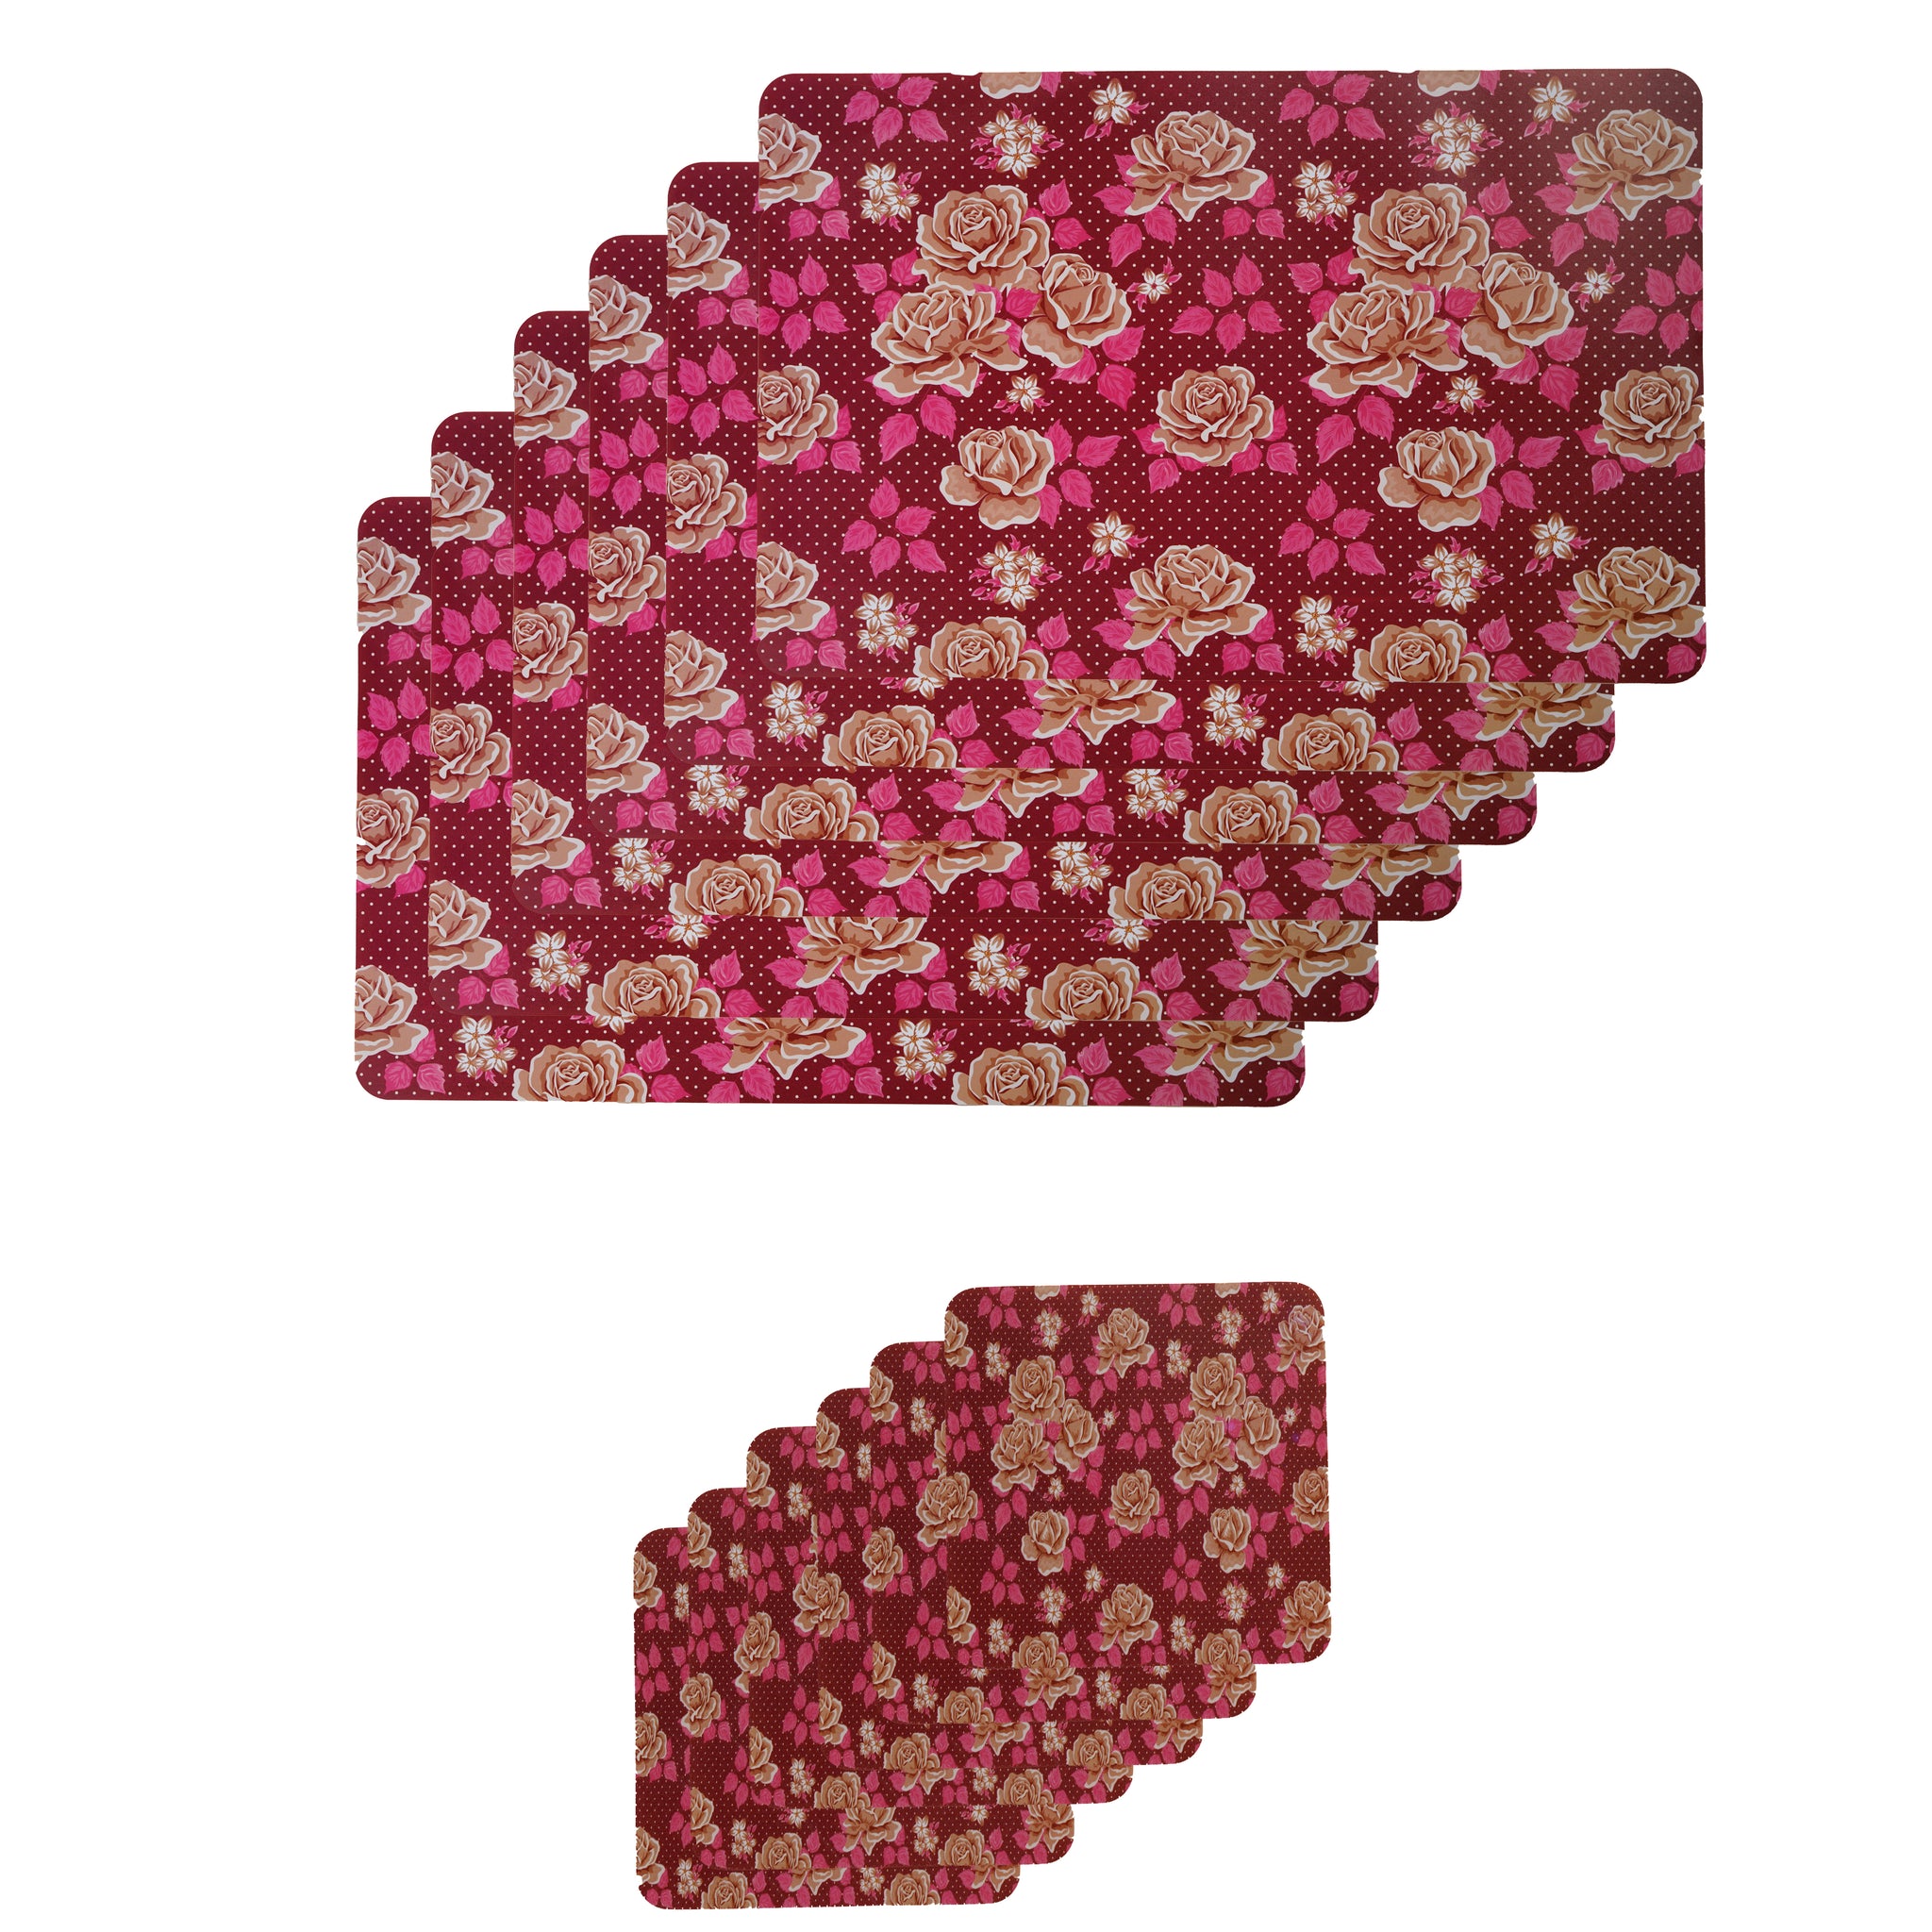 Latest Table Mats Pack of 6 with Coasters, Pink (TORO, Printed Rose)